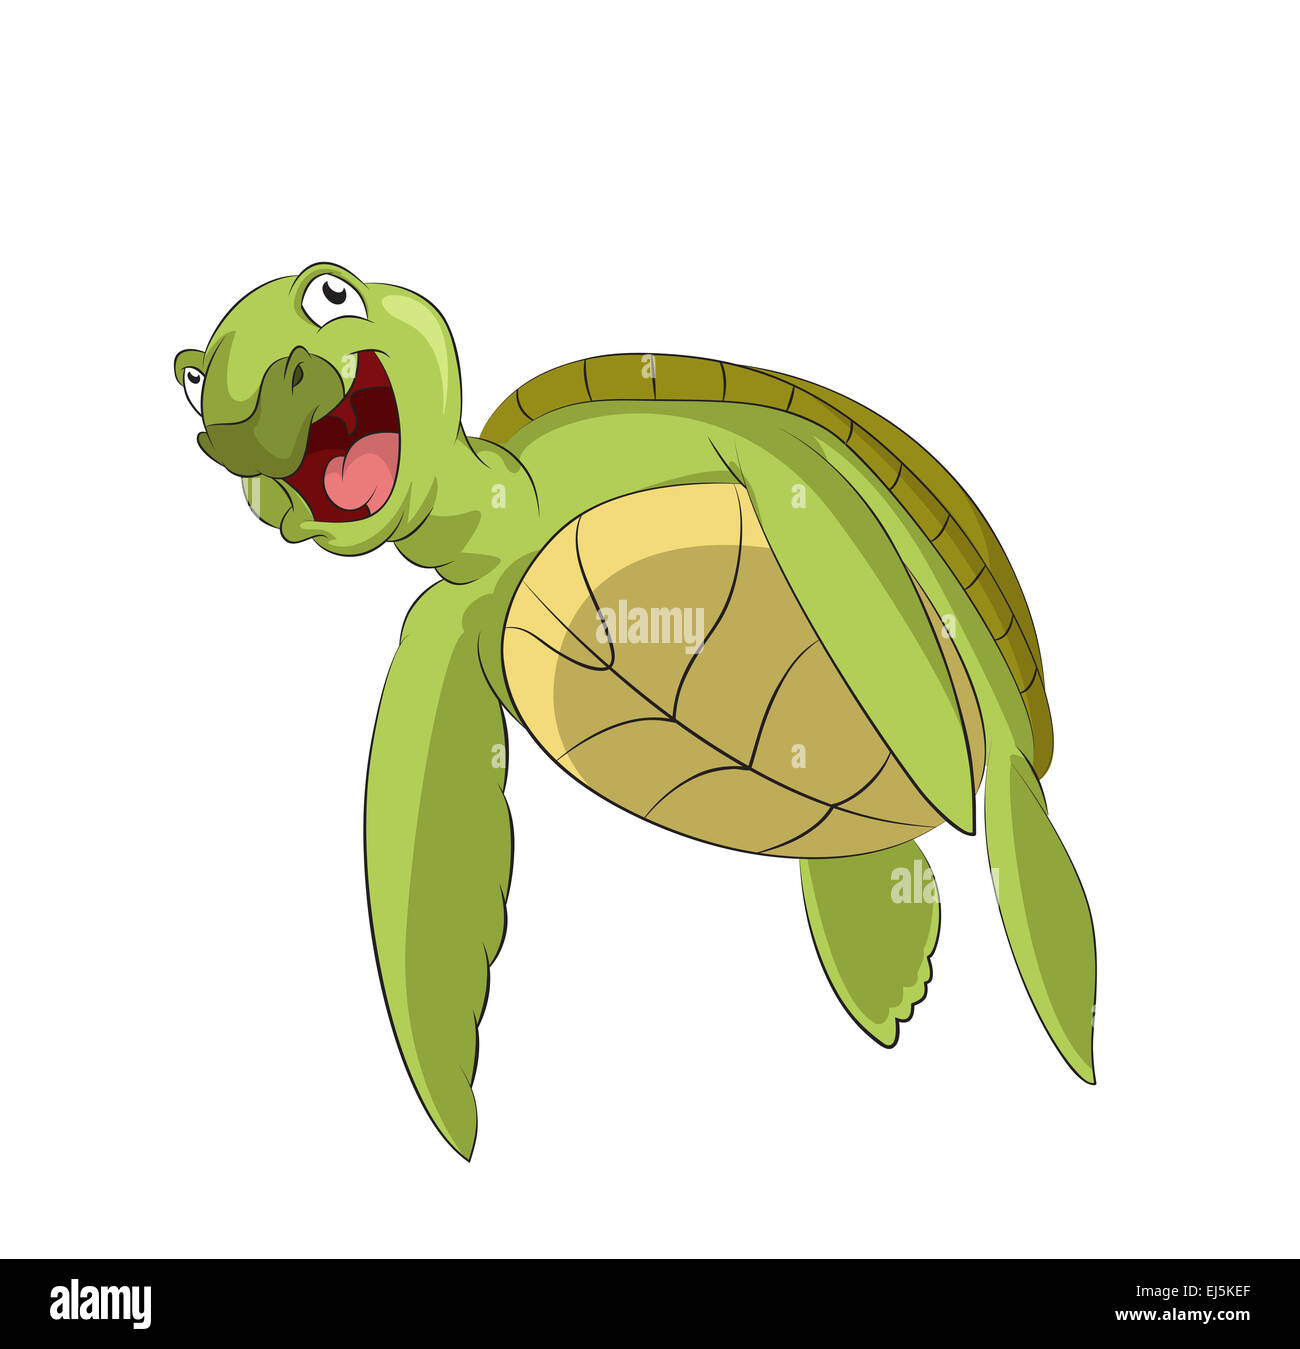 Vector image of funny cartoon smiling turtle Stock Photo